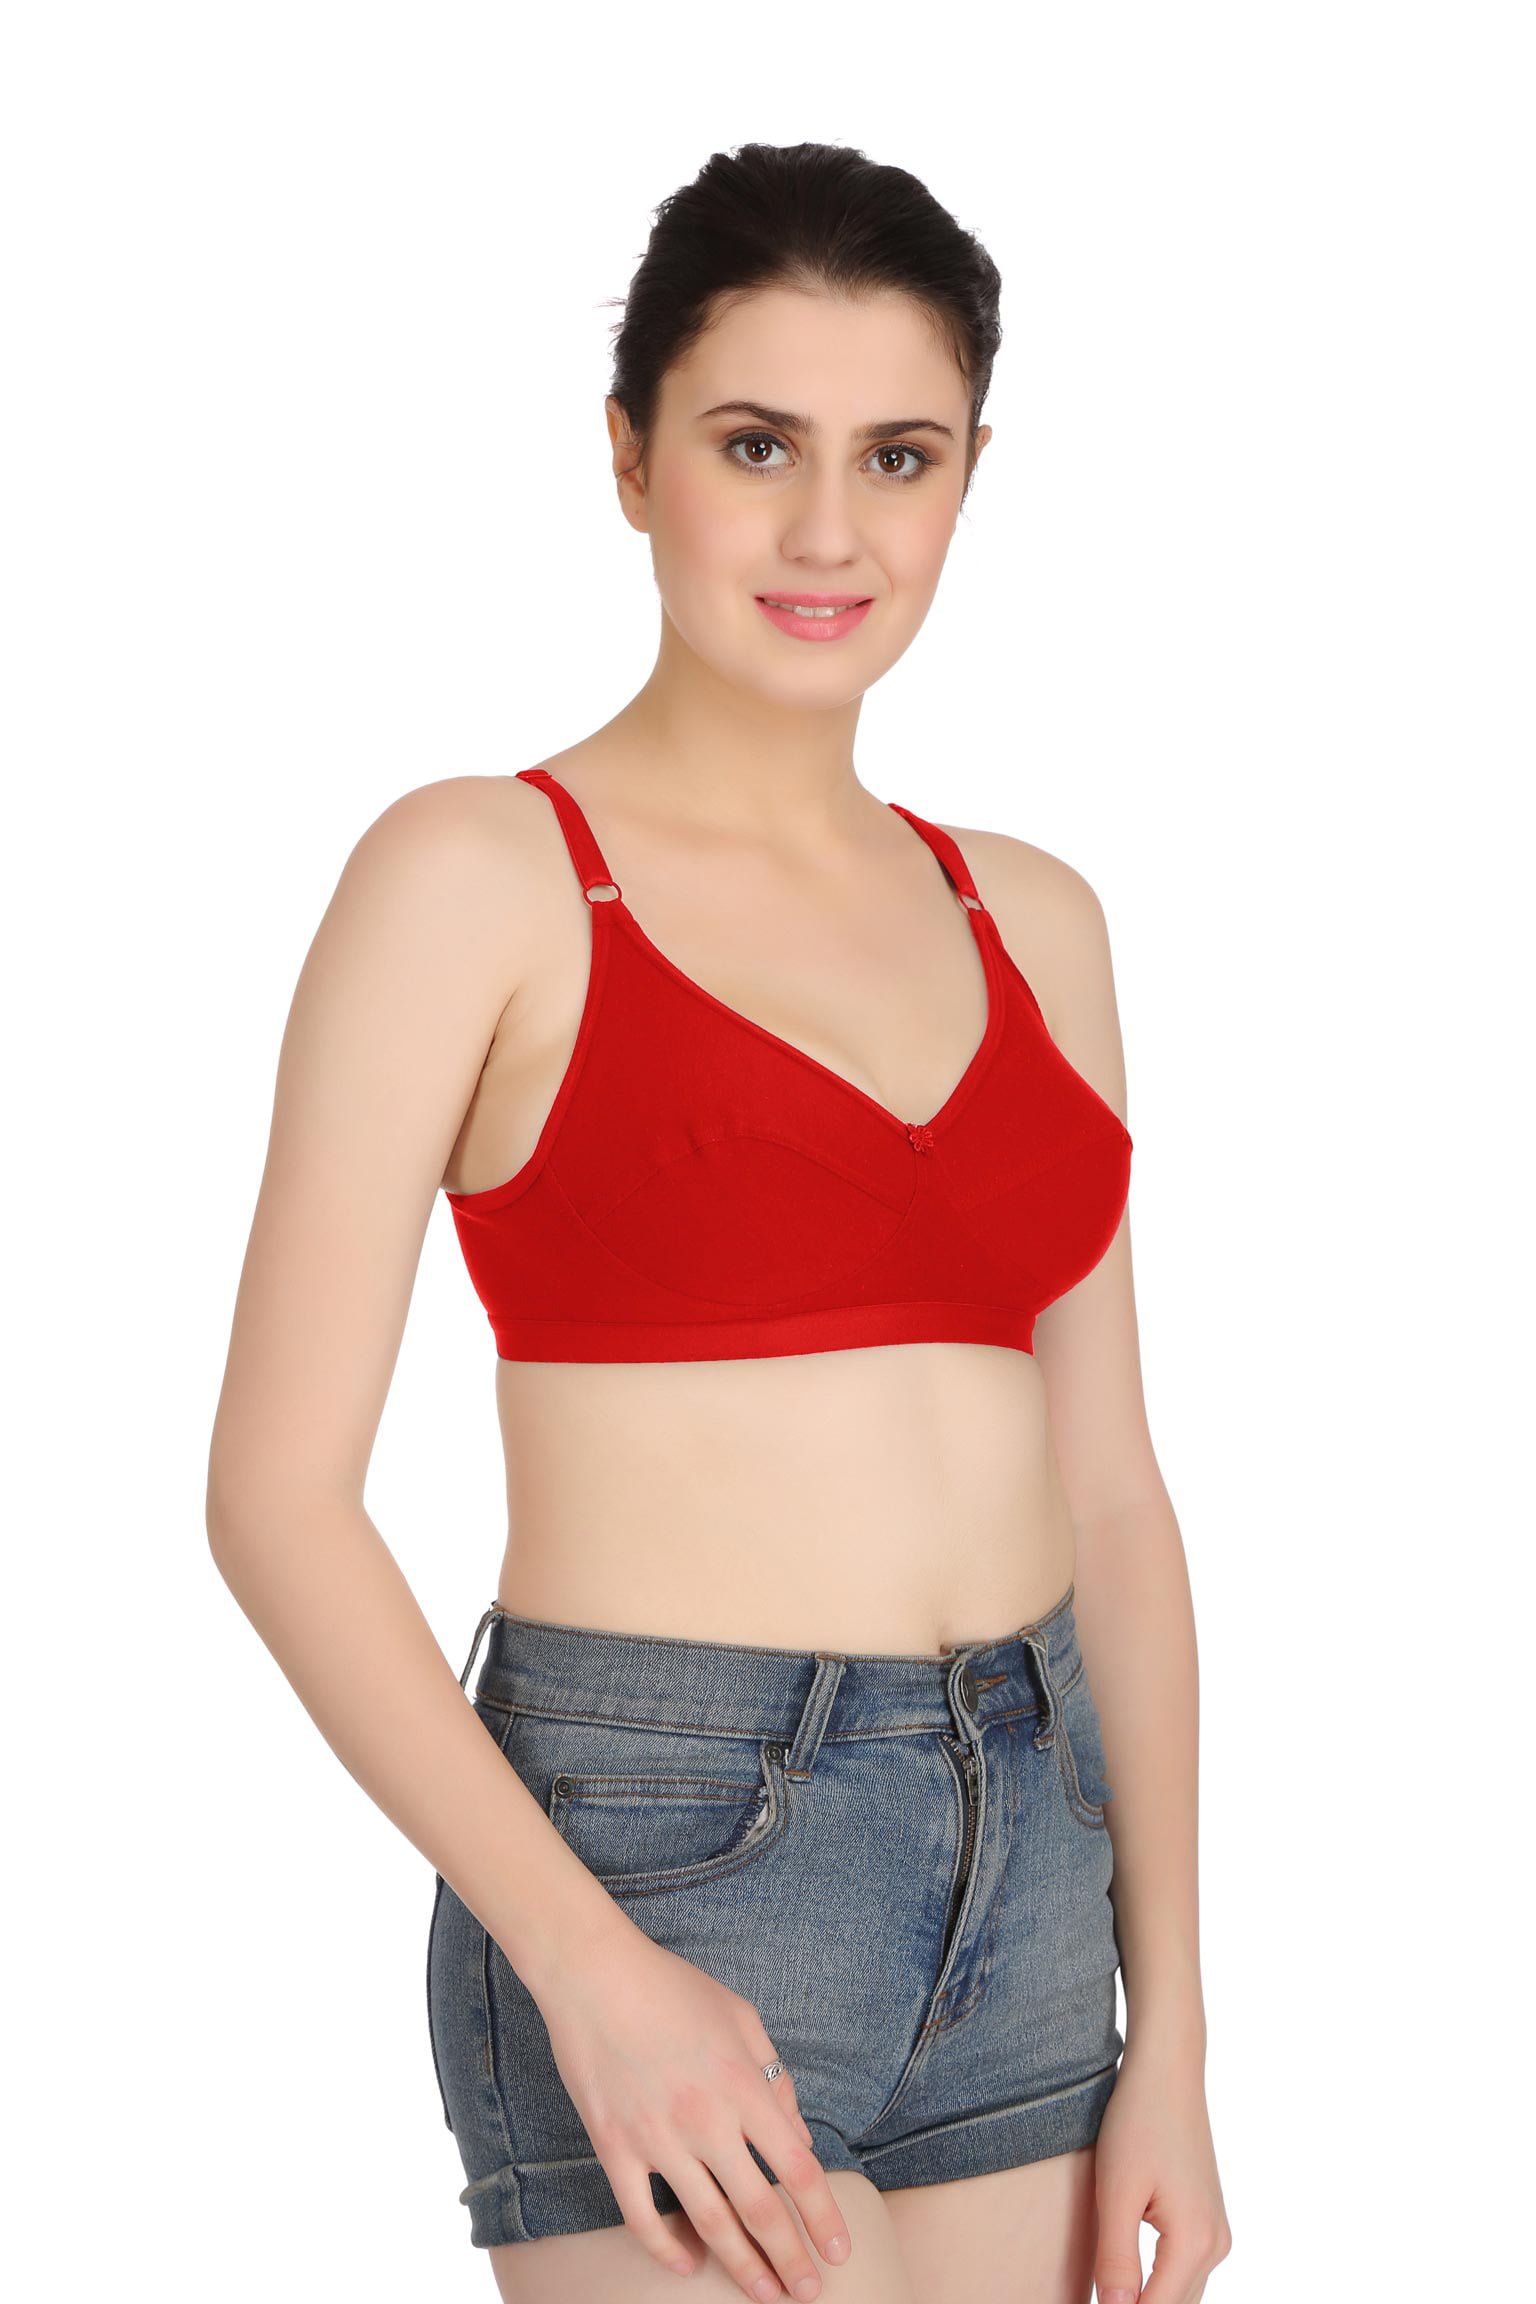 Sunny Lingerie's Women BRA Give The Best Comfort And Feel .